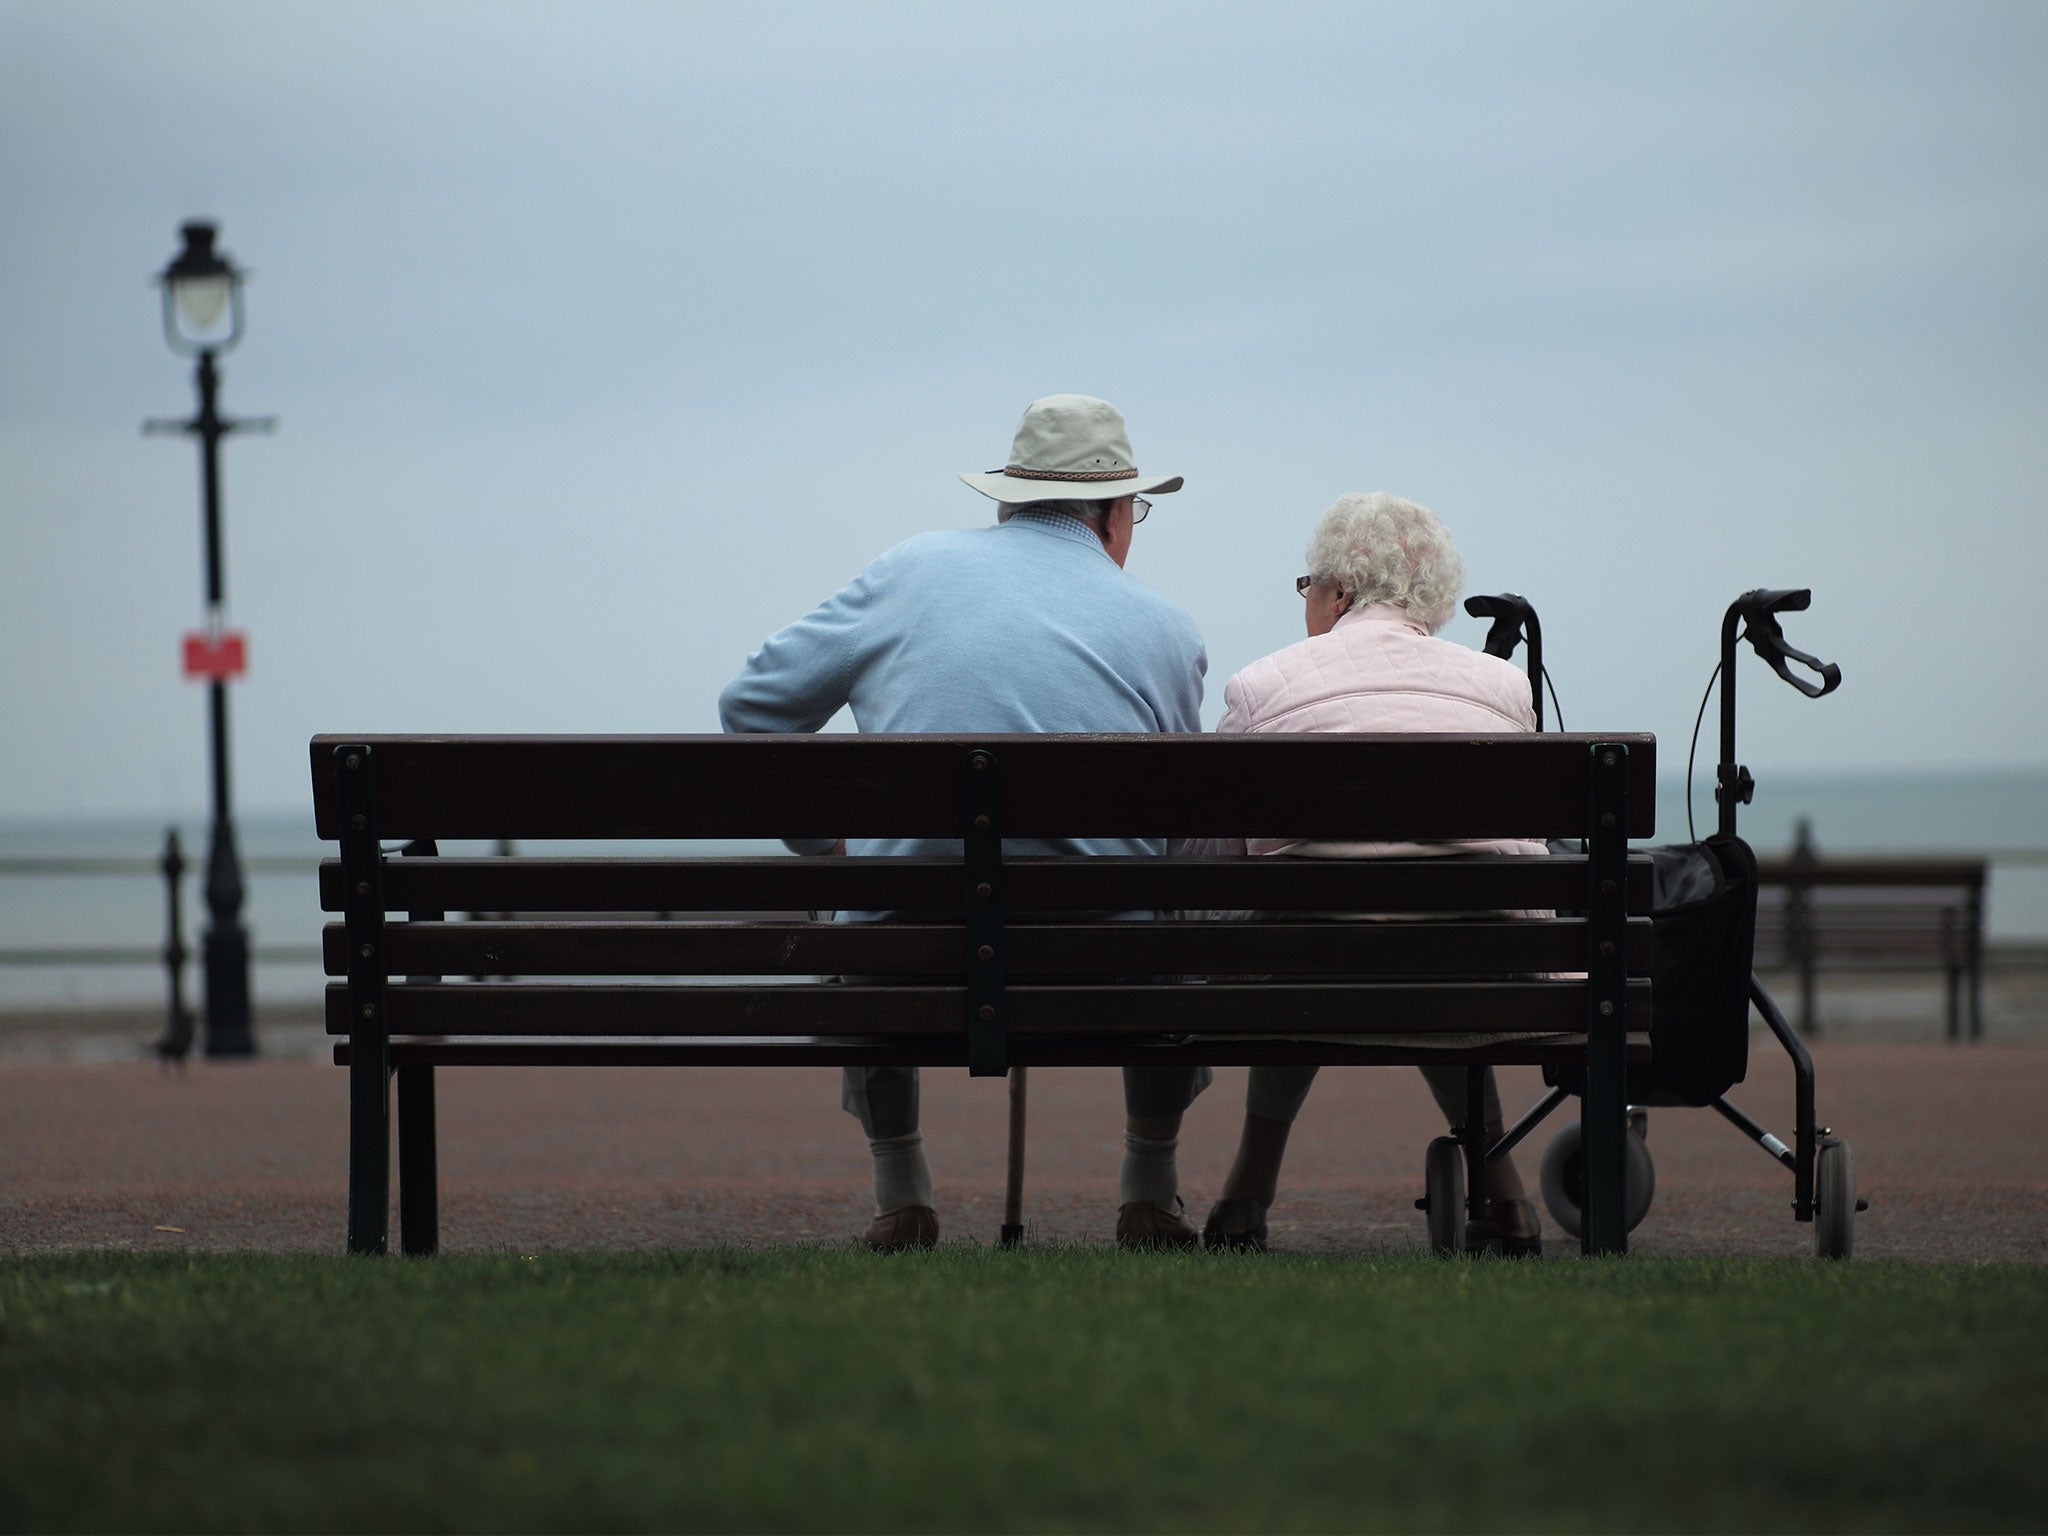 Related Video: State pension age to rise to 68 seven years earlier than planned